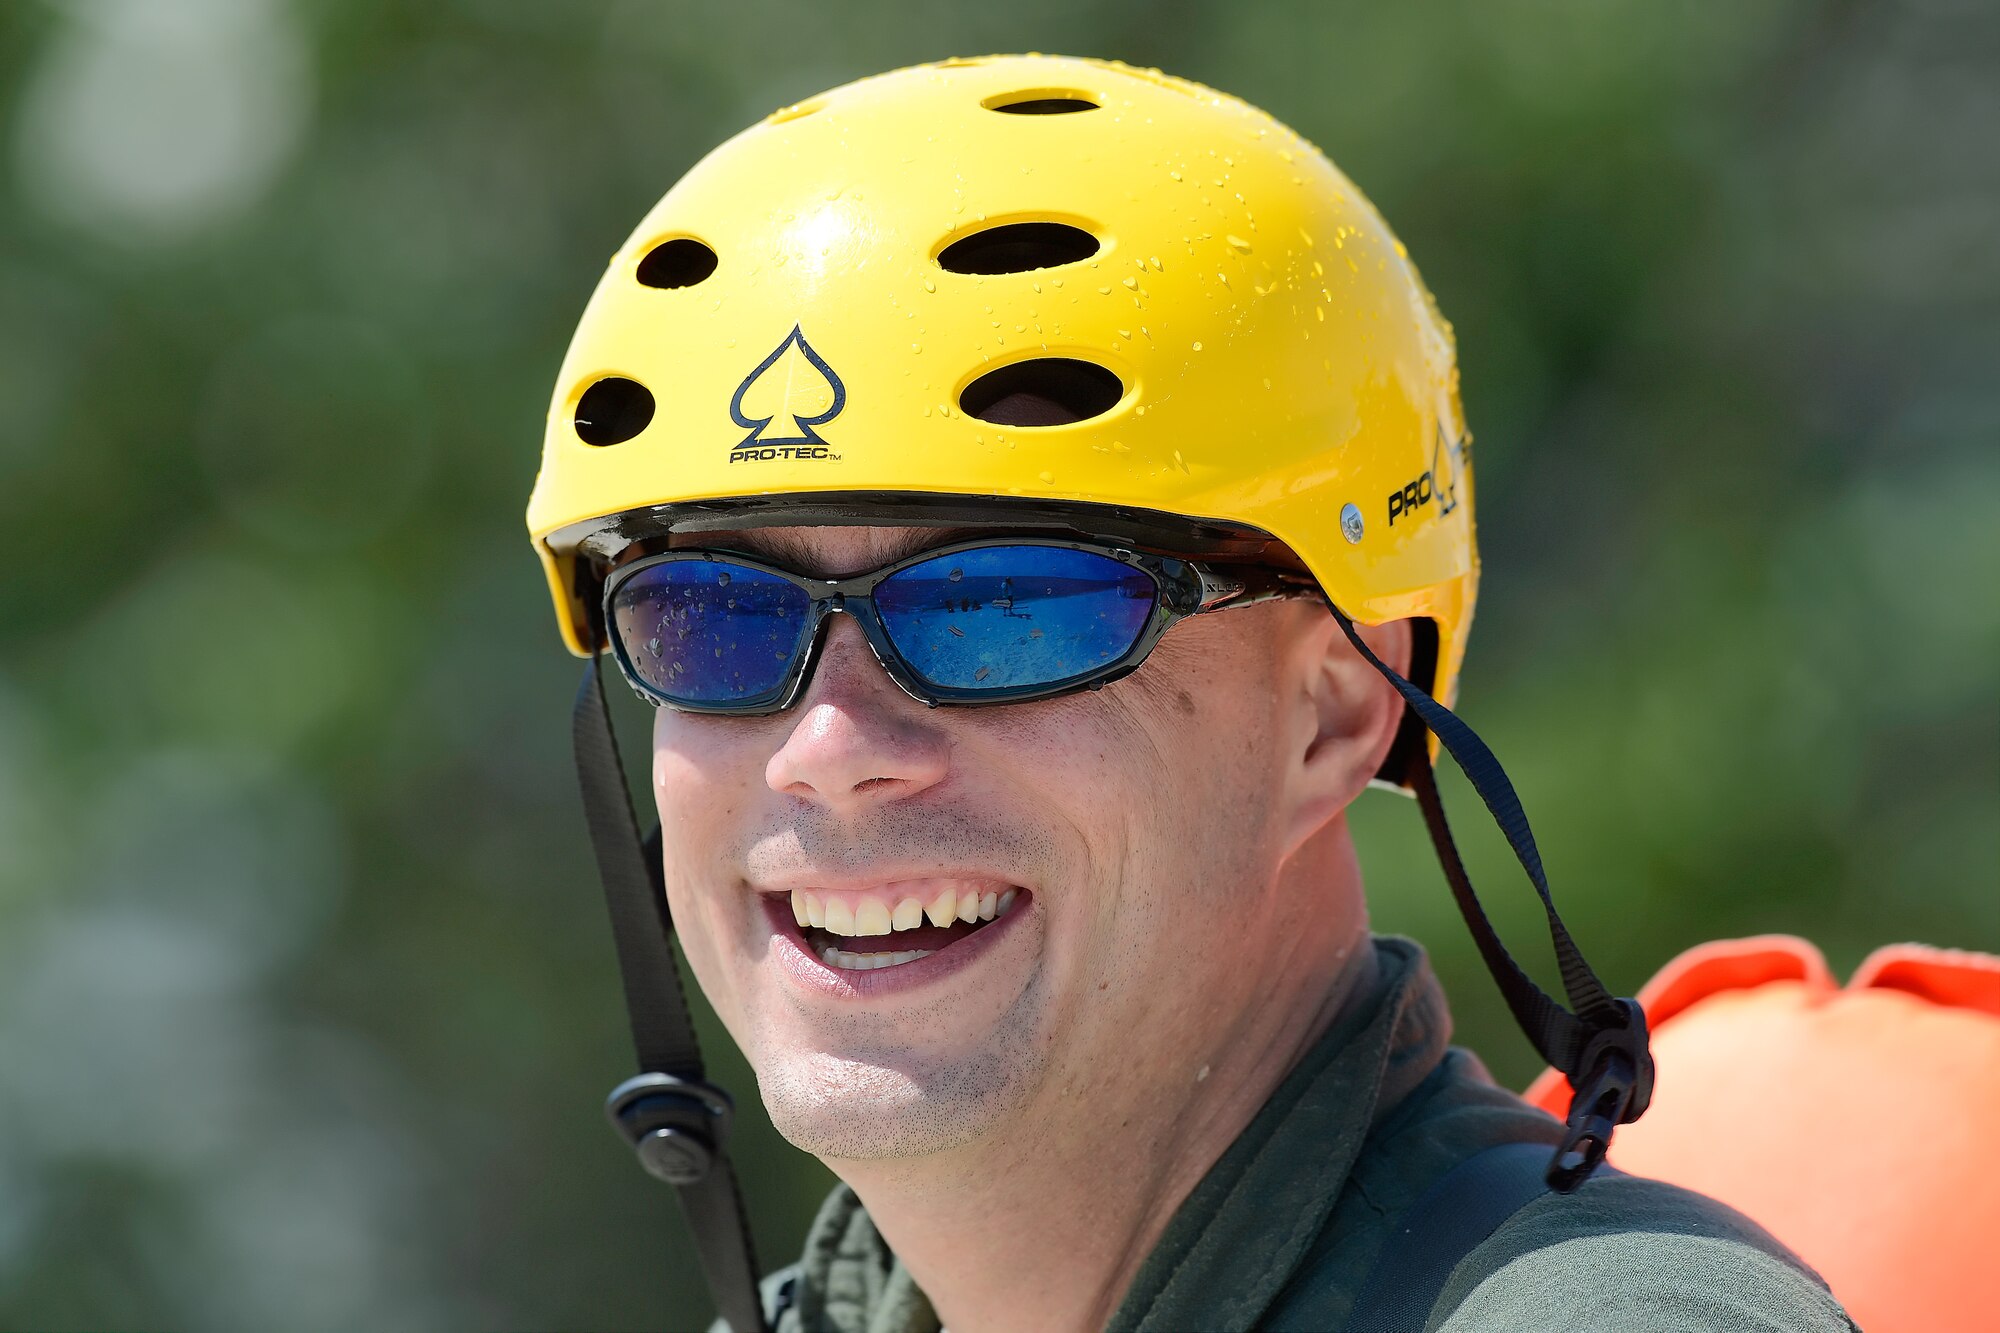 Technical Sgt. Jason Massey, 3d Airlift Squadron C-17A Globemaster III loadmaster, smiles after successfully completing a water survival refresher training event in the Delaware Bay in a class conducted by the 436th Operations Support Squadron Survival, Evasion, Resistance and Escape Operations, July 17, 2015, near Dover Air Force Base, Del.  The C-5M Super Galaxy and C-17A Globemaster III aircrew of the 436th Airlift Wing and the 512th Airlift Wing completed the training which is required every three years. (U.S. Air Force photo/Greg L. Davis)